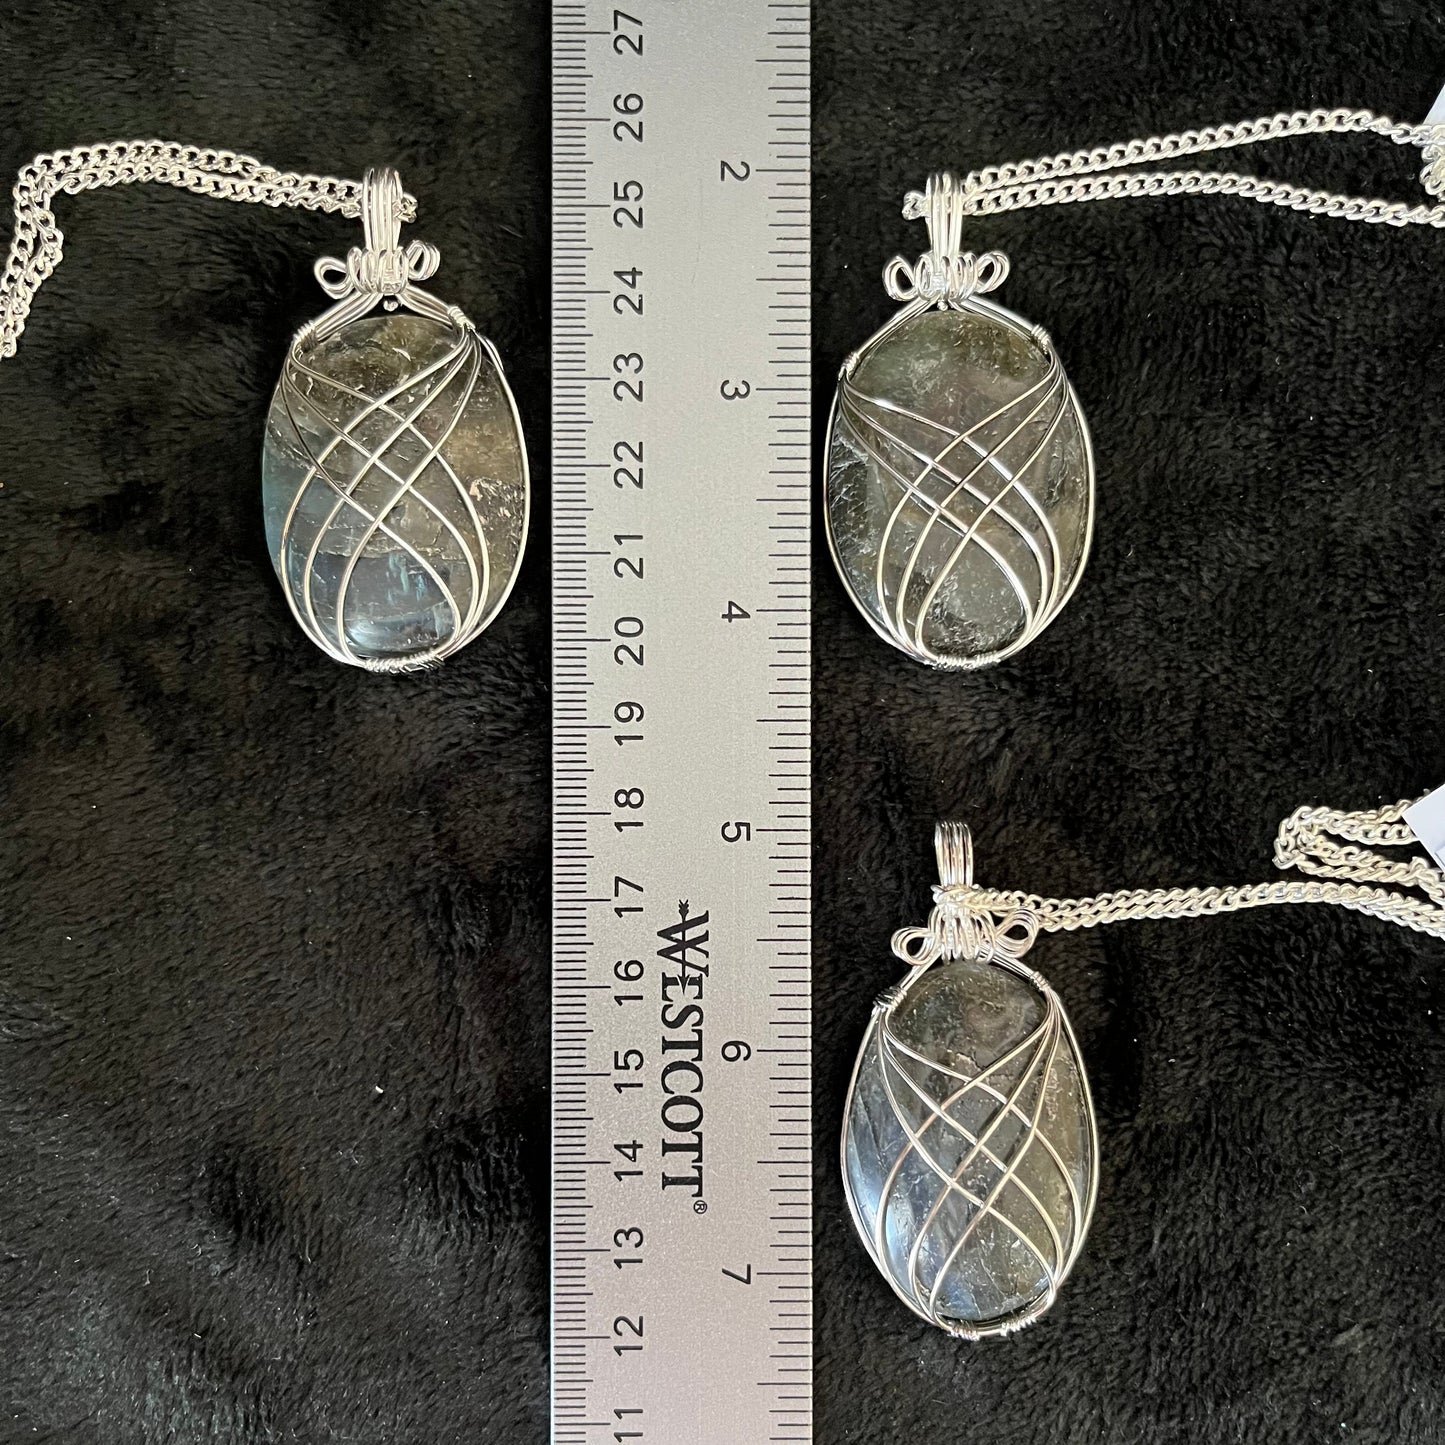 3 Fancy silver wire wrapped Labradorite Oval cabochon pendants, approximately 1 3/4" long, attatched to silver chains, displayed next to a ruler